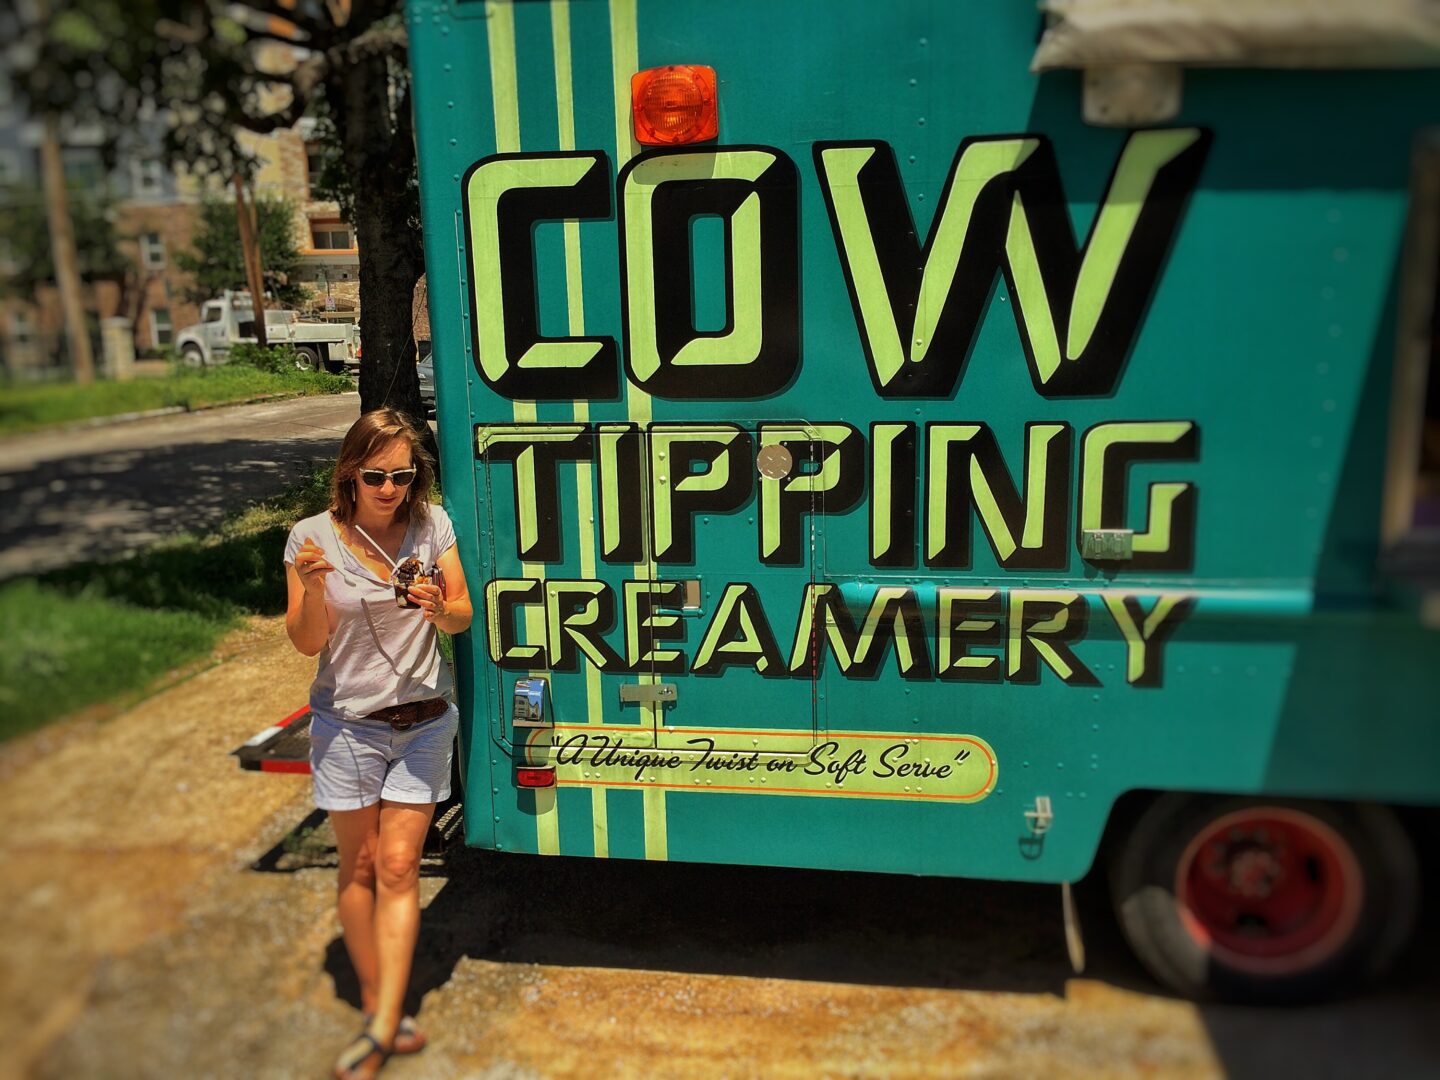 A woman standing in front of a food truck.